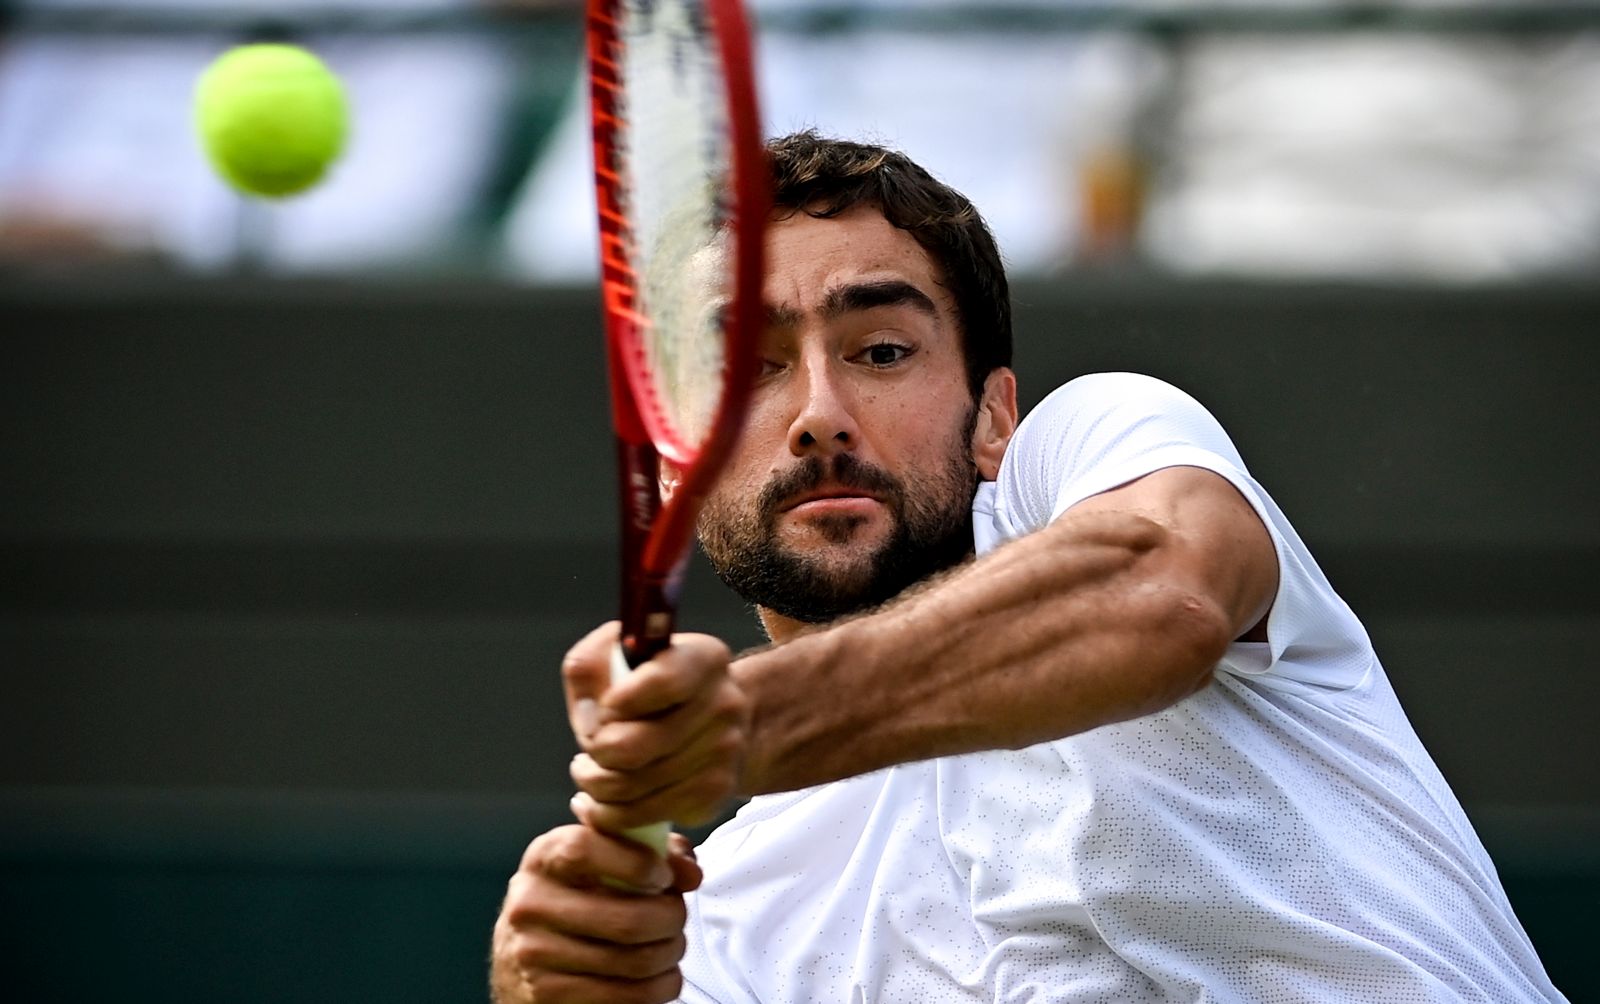 epa09320553 Marin Cilic of Croatia hits a backhand during the 3rd round match against Daniil Medwedew of Russia at the Wimbledon Championships, in Wimbledon, Britain, 03 July 2021.  EPA/NEIL HALL   EDITORIAL USE ONLY